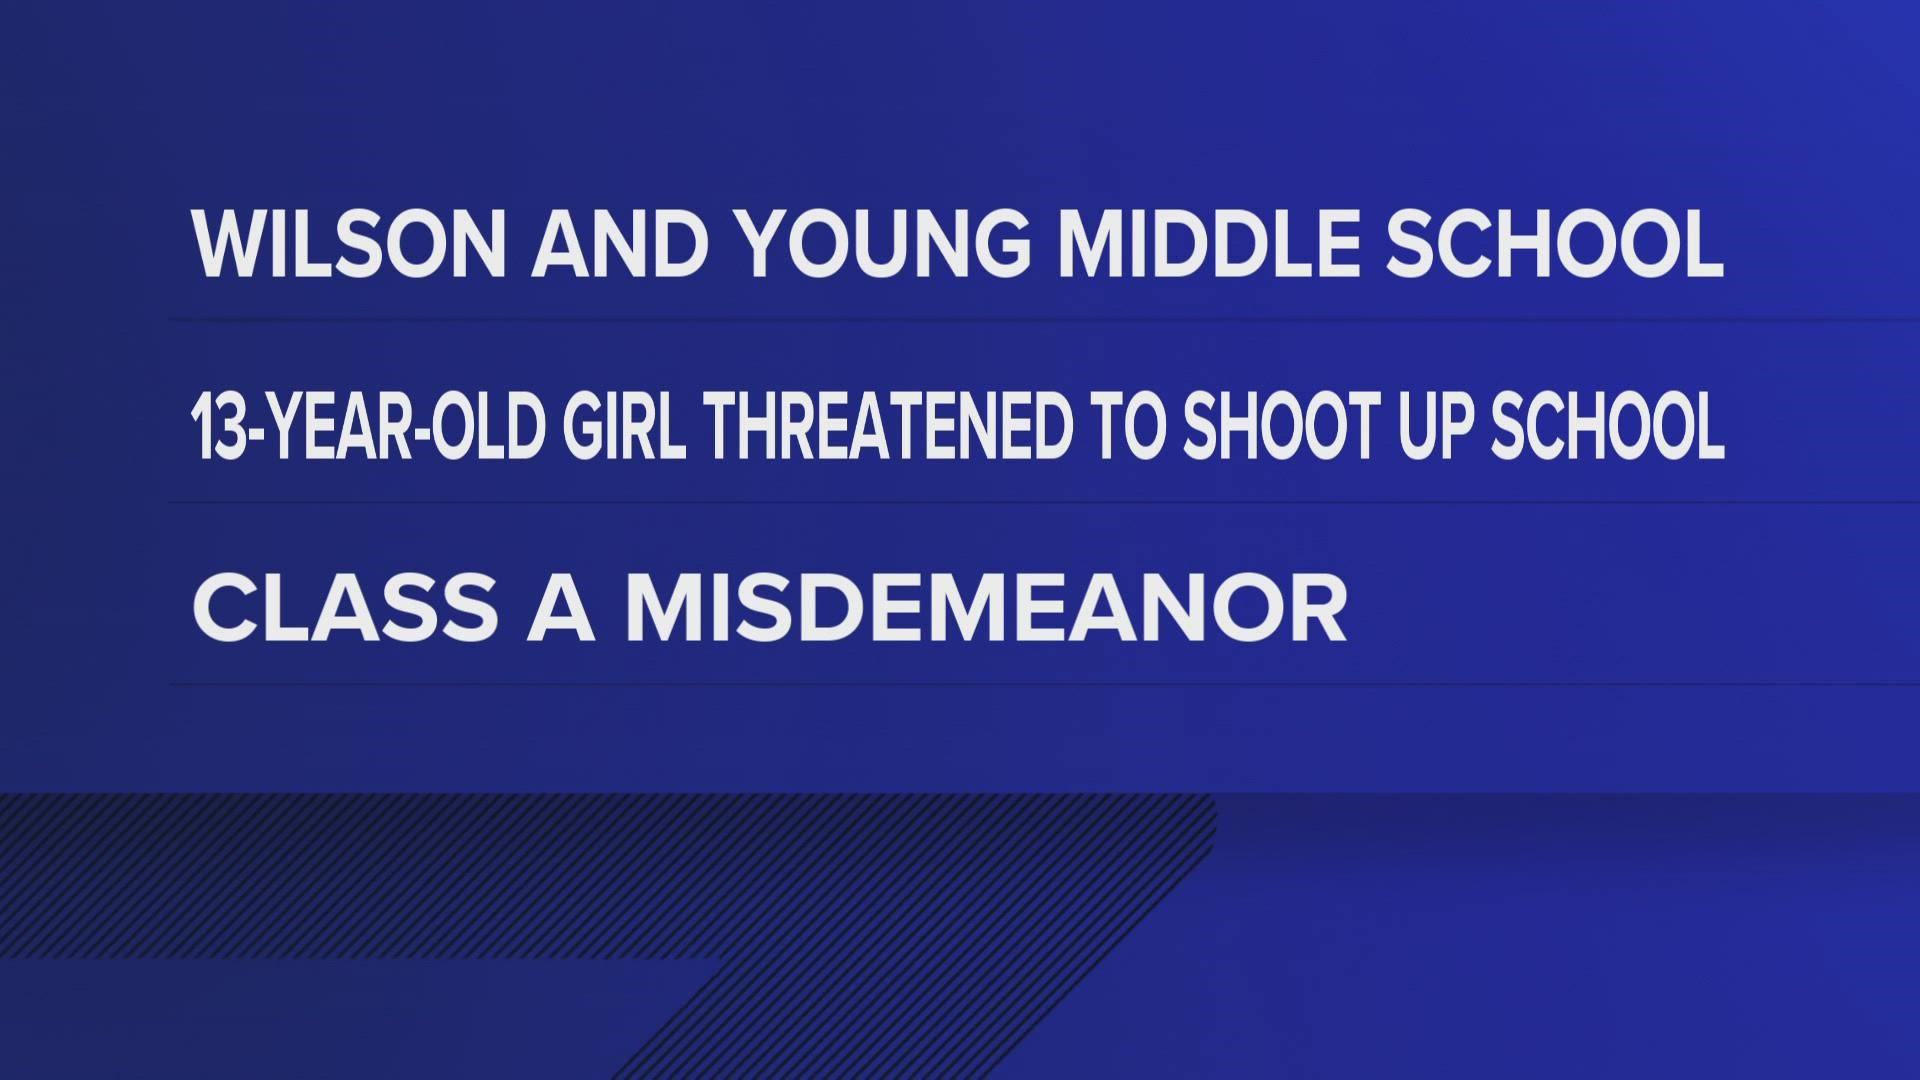 ECISD reports the 13-year-old girl made a threat against an administrator and the school.